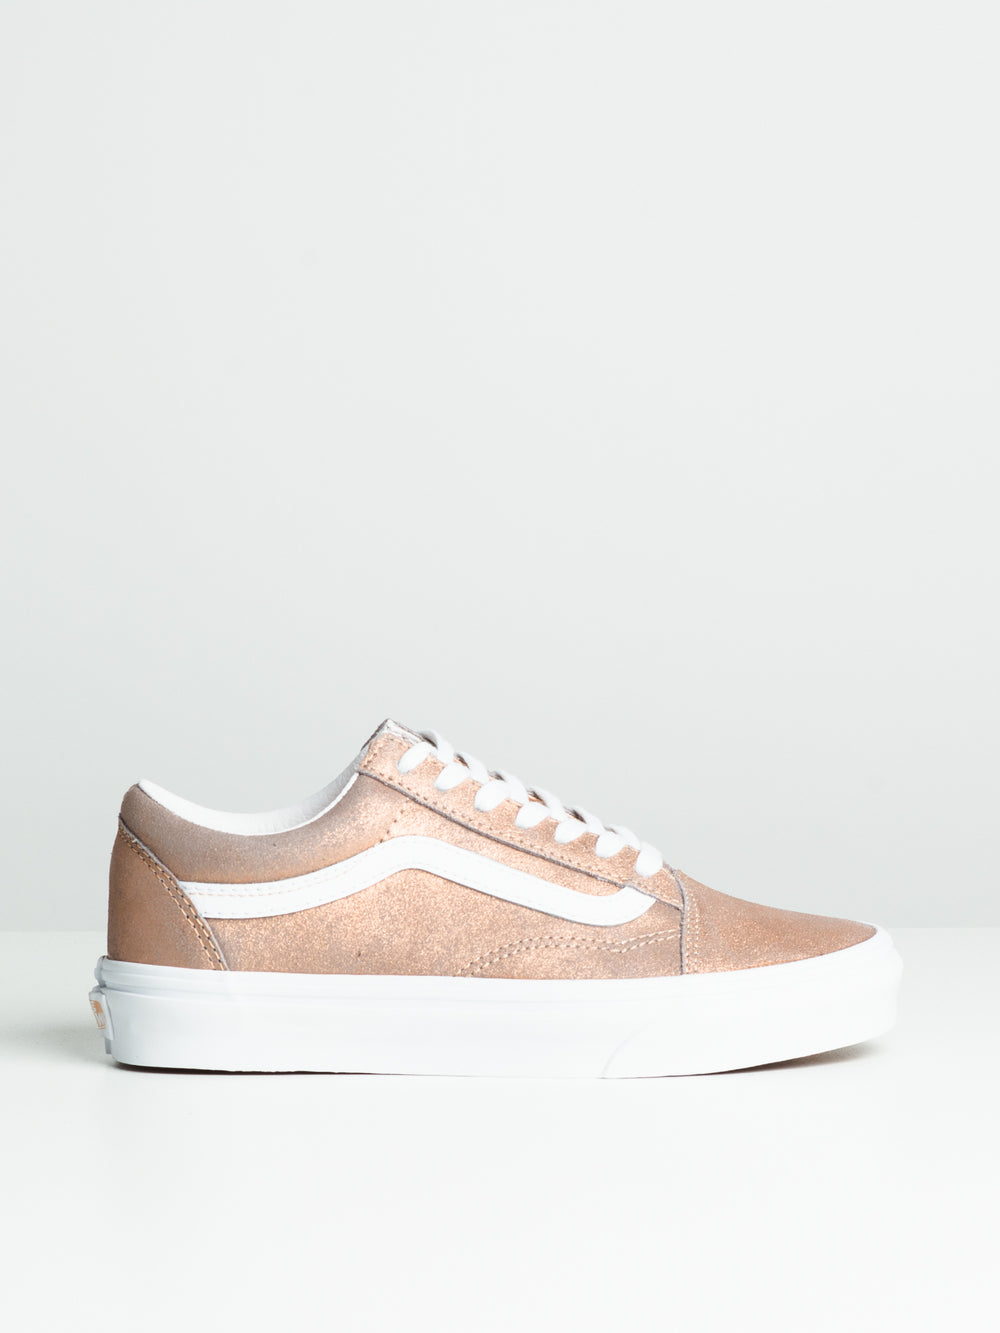 WOMENS OLD SKOOL - ROSE GOLD - CLEARANCE